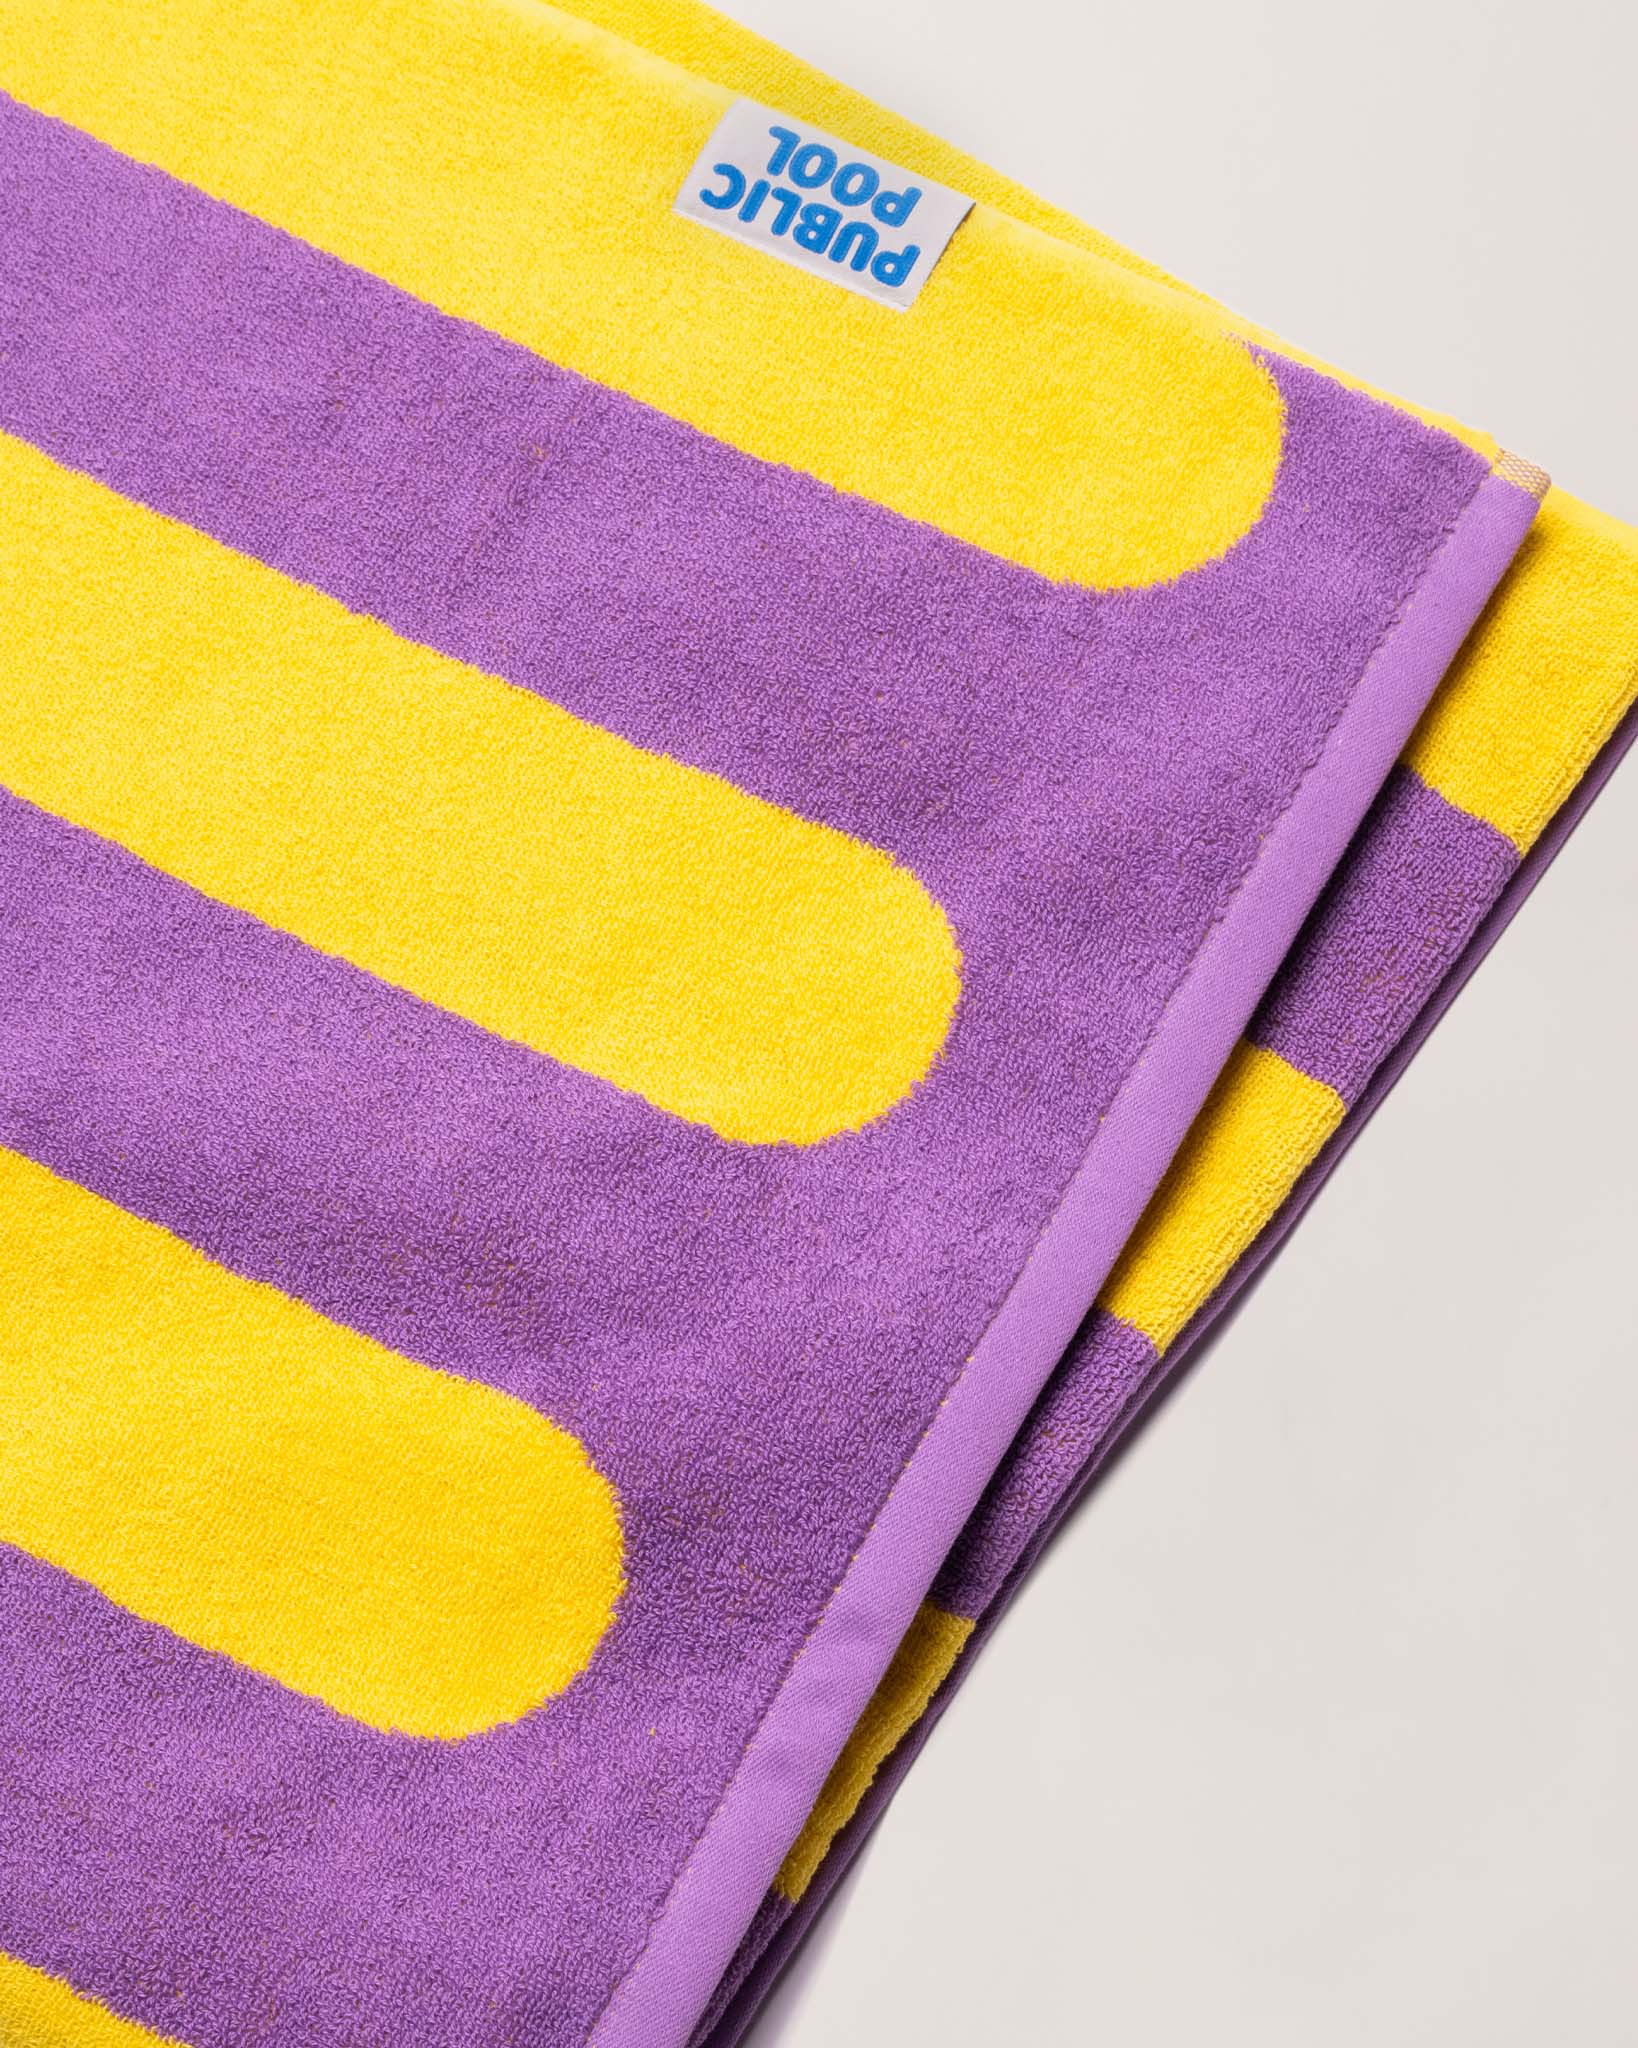 A folded purple and yellow striped towel. 